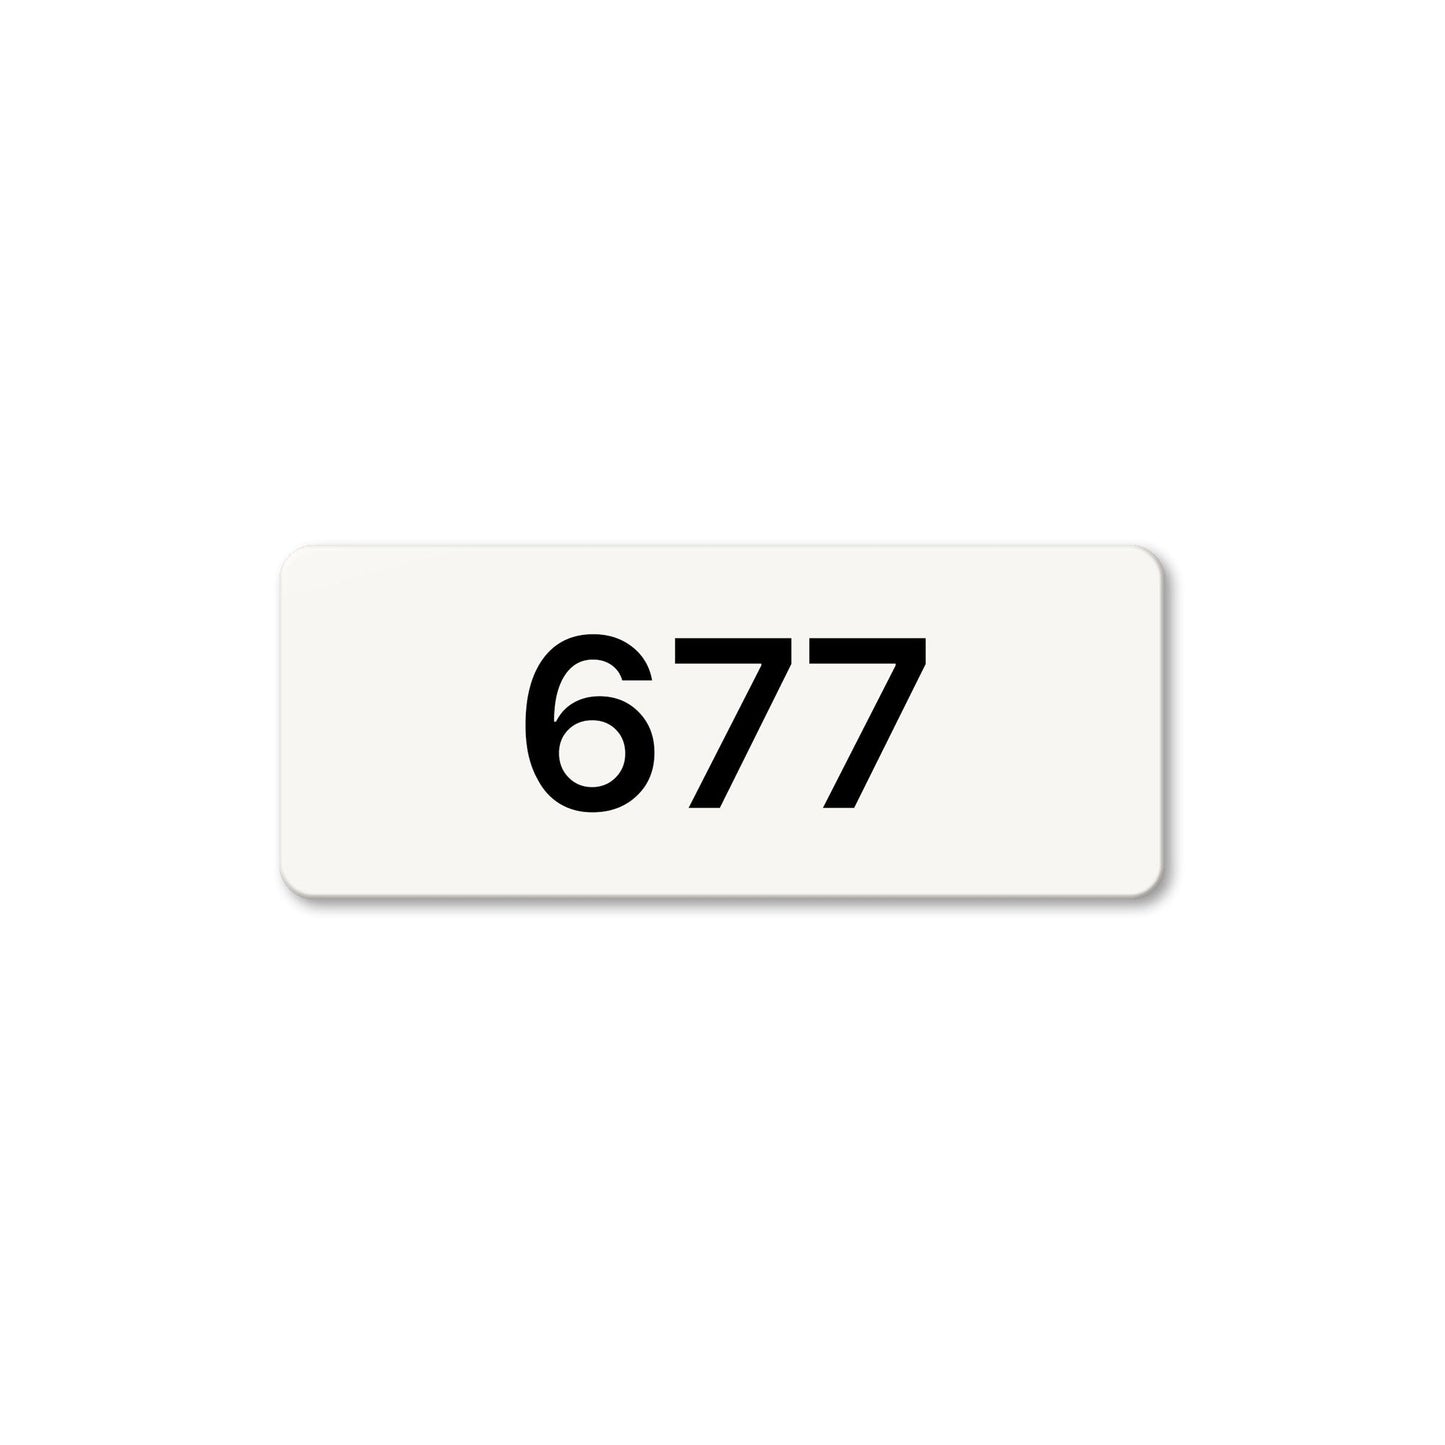 Numeral 677